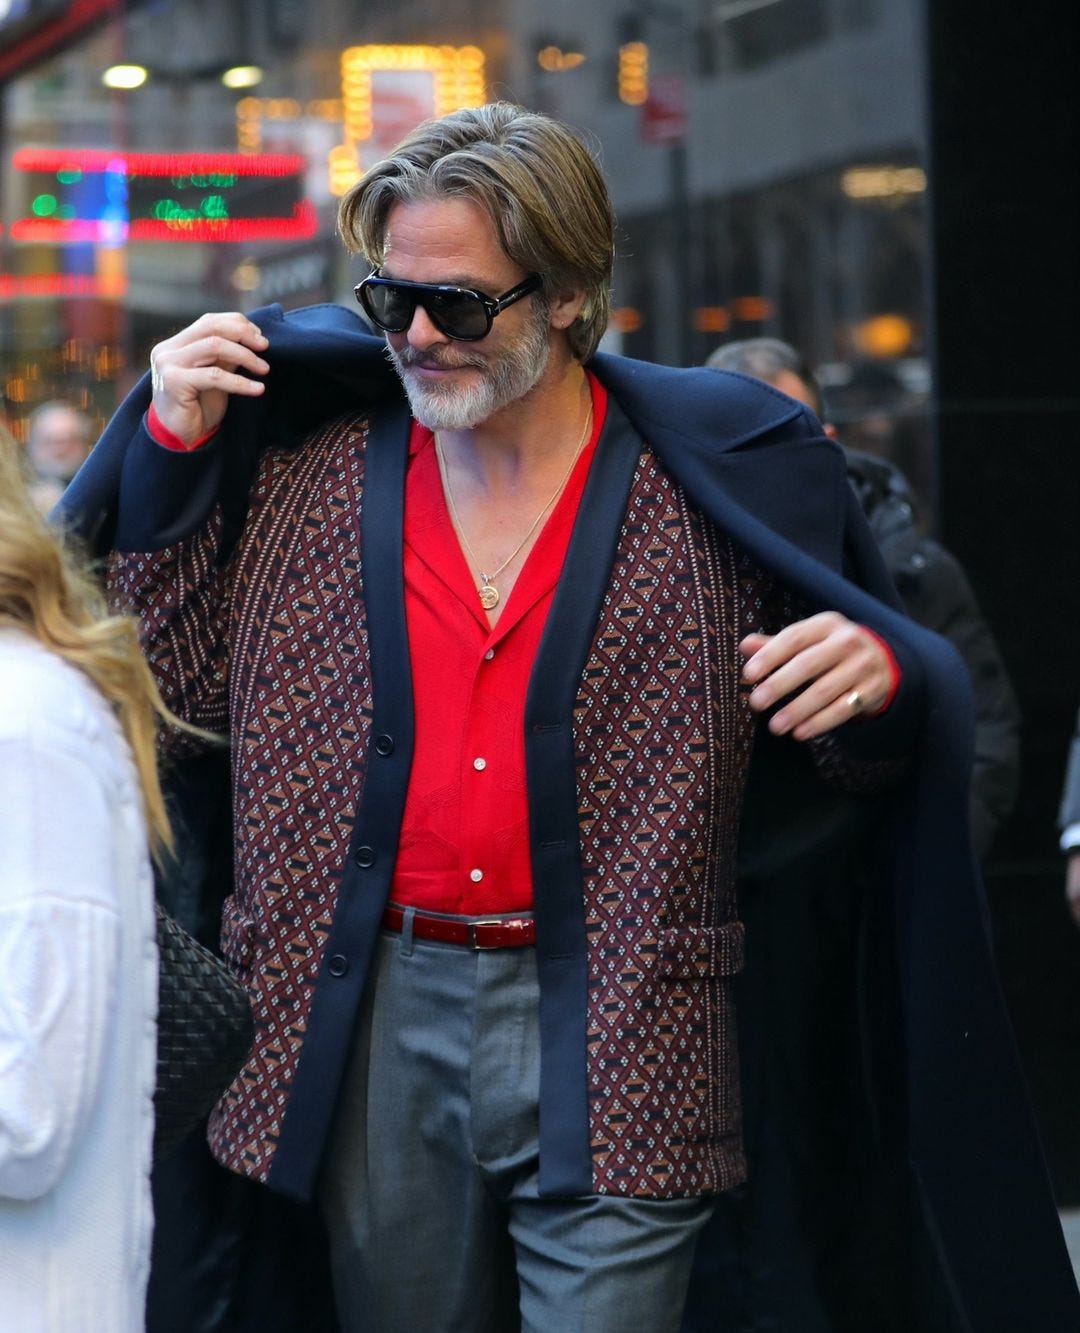 Chris Pine wearing a red button-down shirt and navy and red cardigan